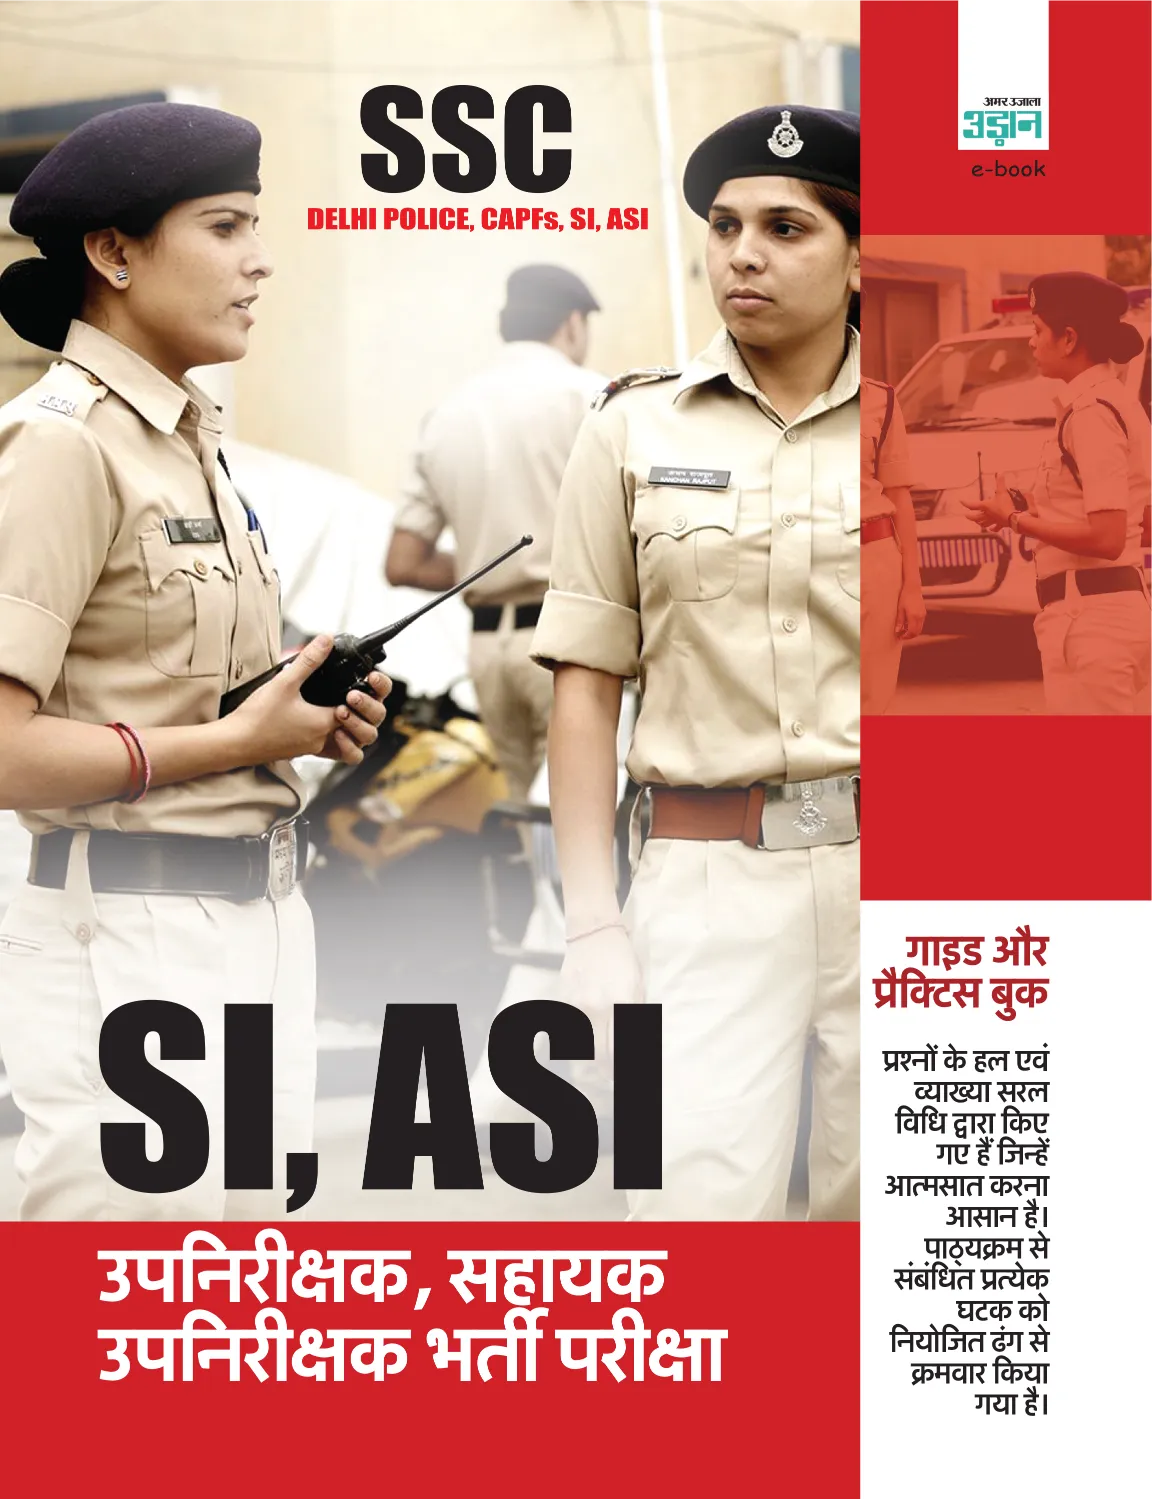 SSC Sub-Inspector in cafs and Delhi police Assistant Sub-Inspector in cisf Exam Guide and Practice Book